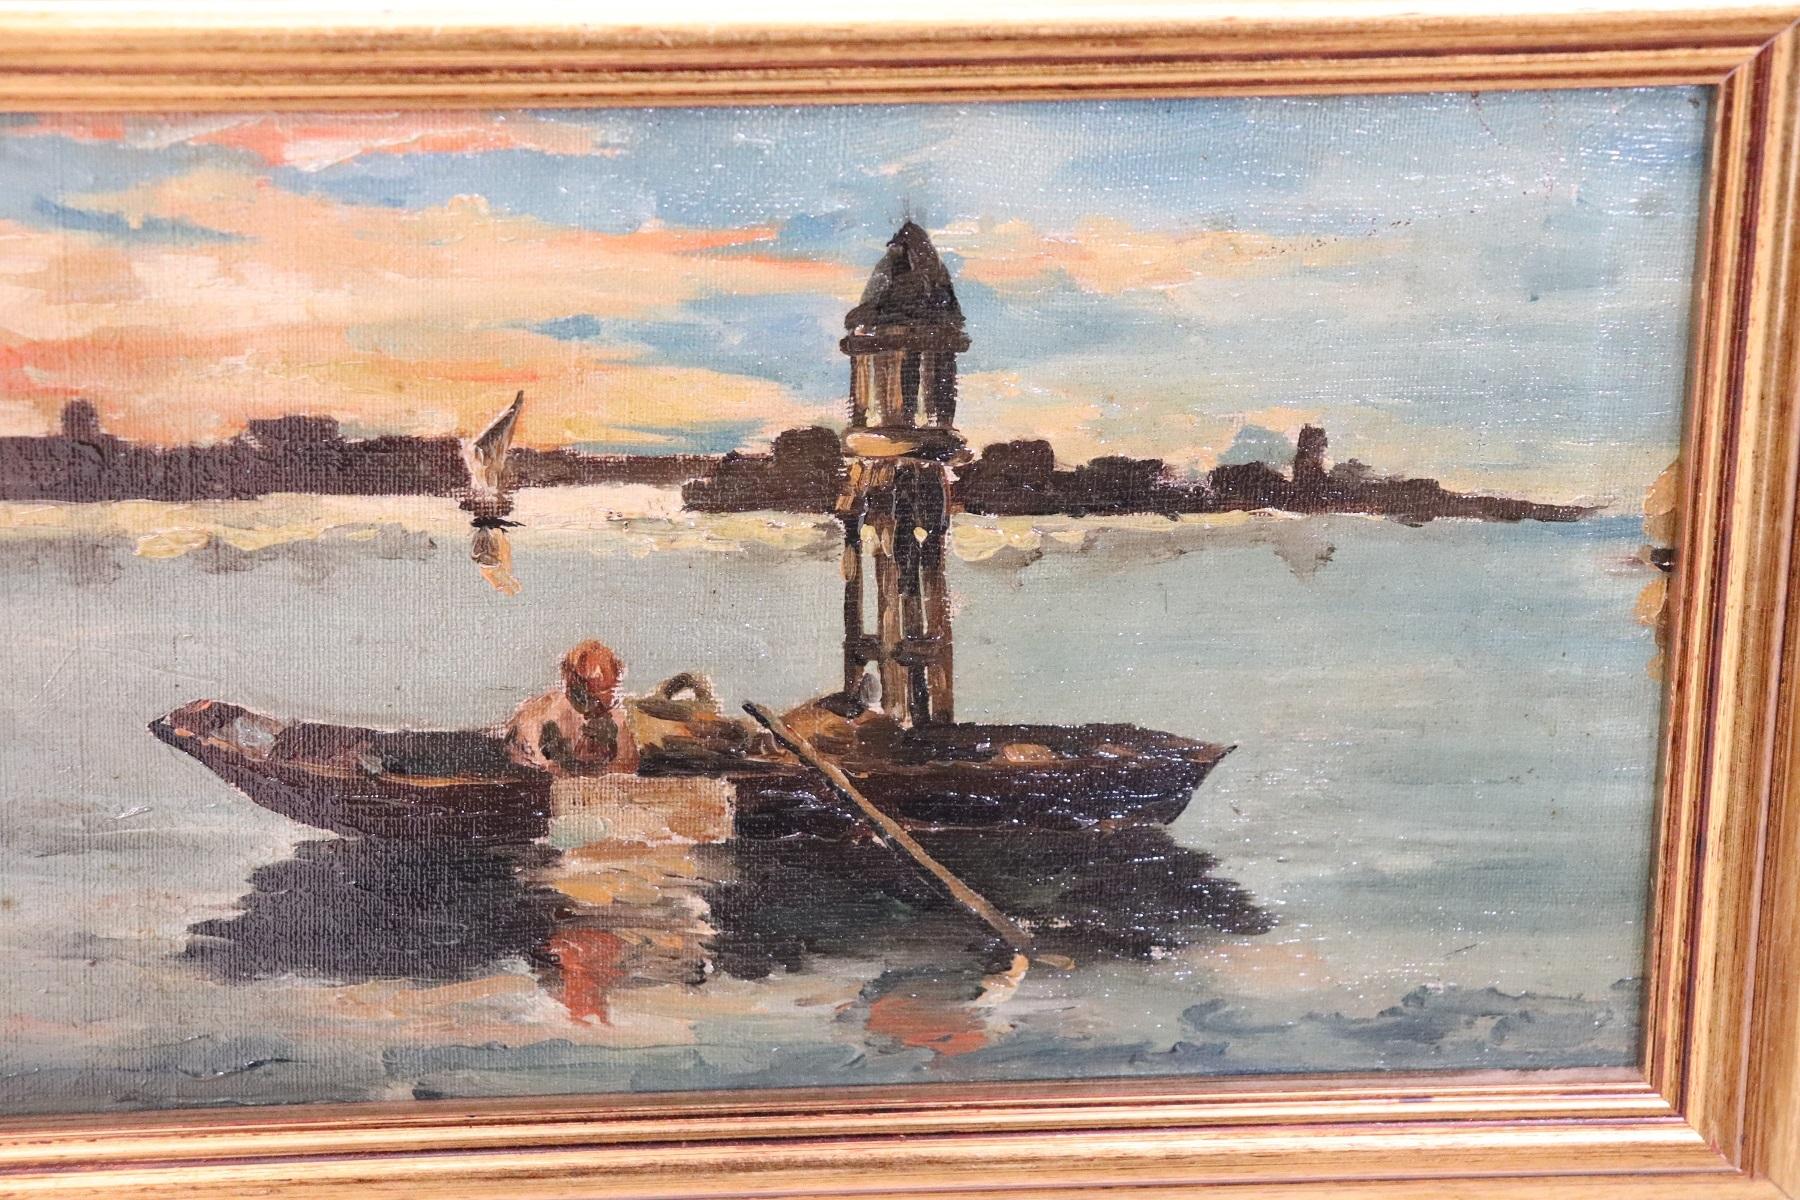 Important refined oil painting on canvas from a collection of 20th century works. Venice landscape oil painting on canvas with golden frame. Refined use of colors excellent pictorial quality. Signed Italian artist not recognized.
     